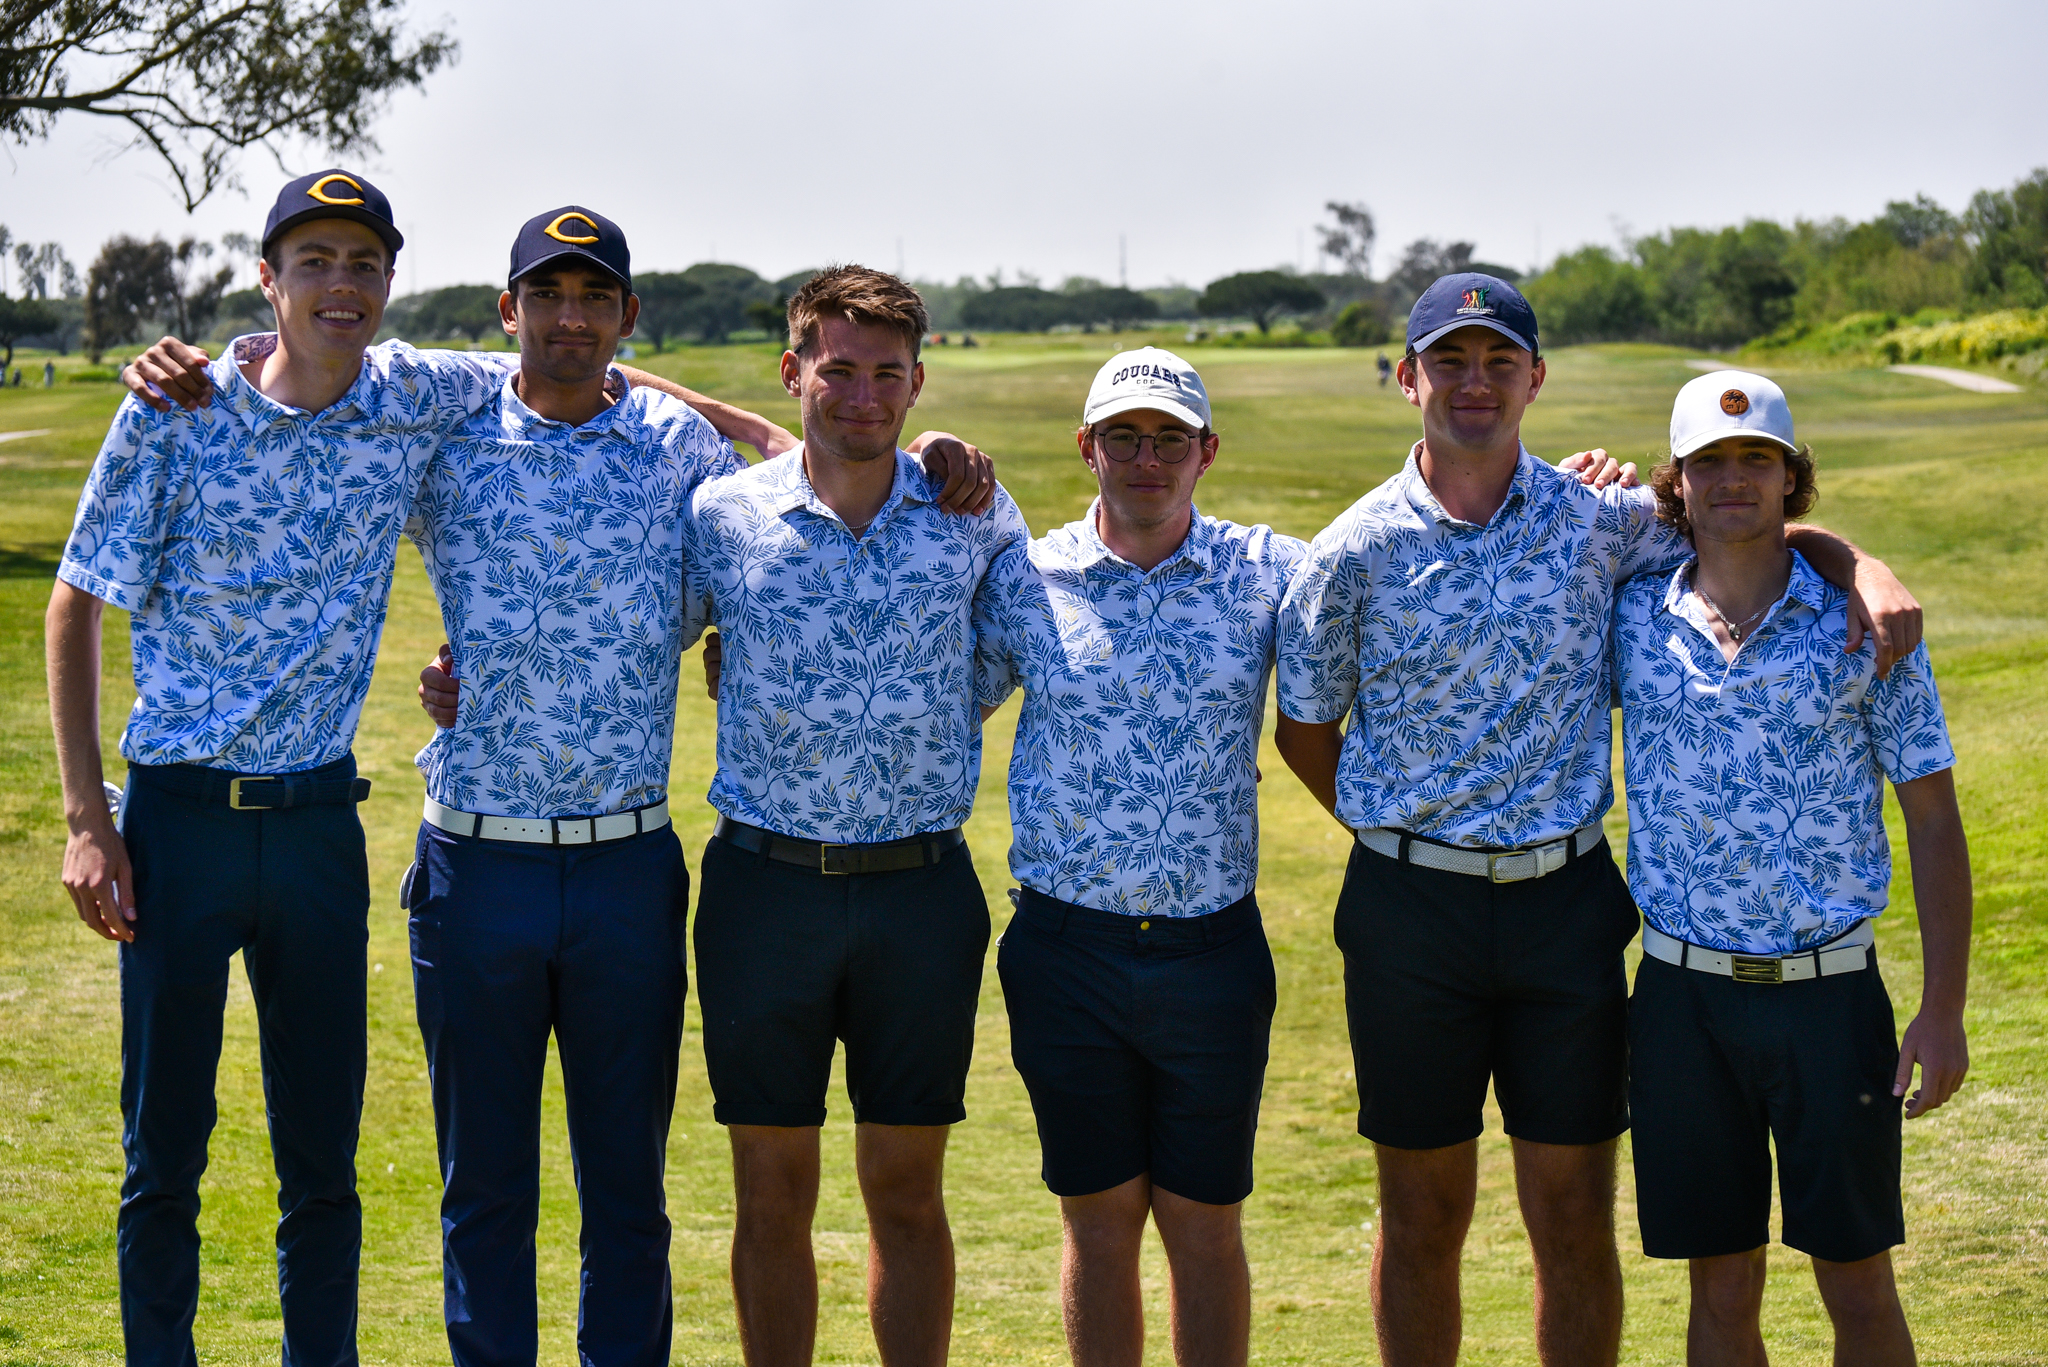 College of the Canyons men's golf team photo from April 10, 2023 at Olives Links golf course.